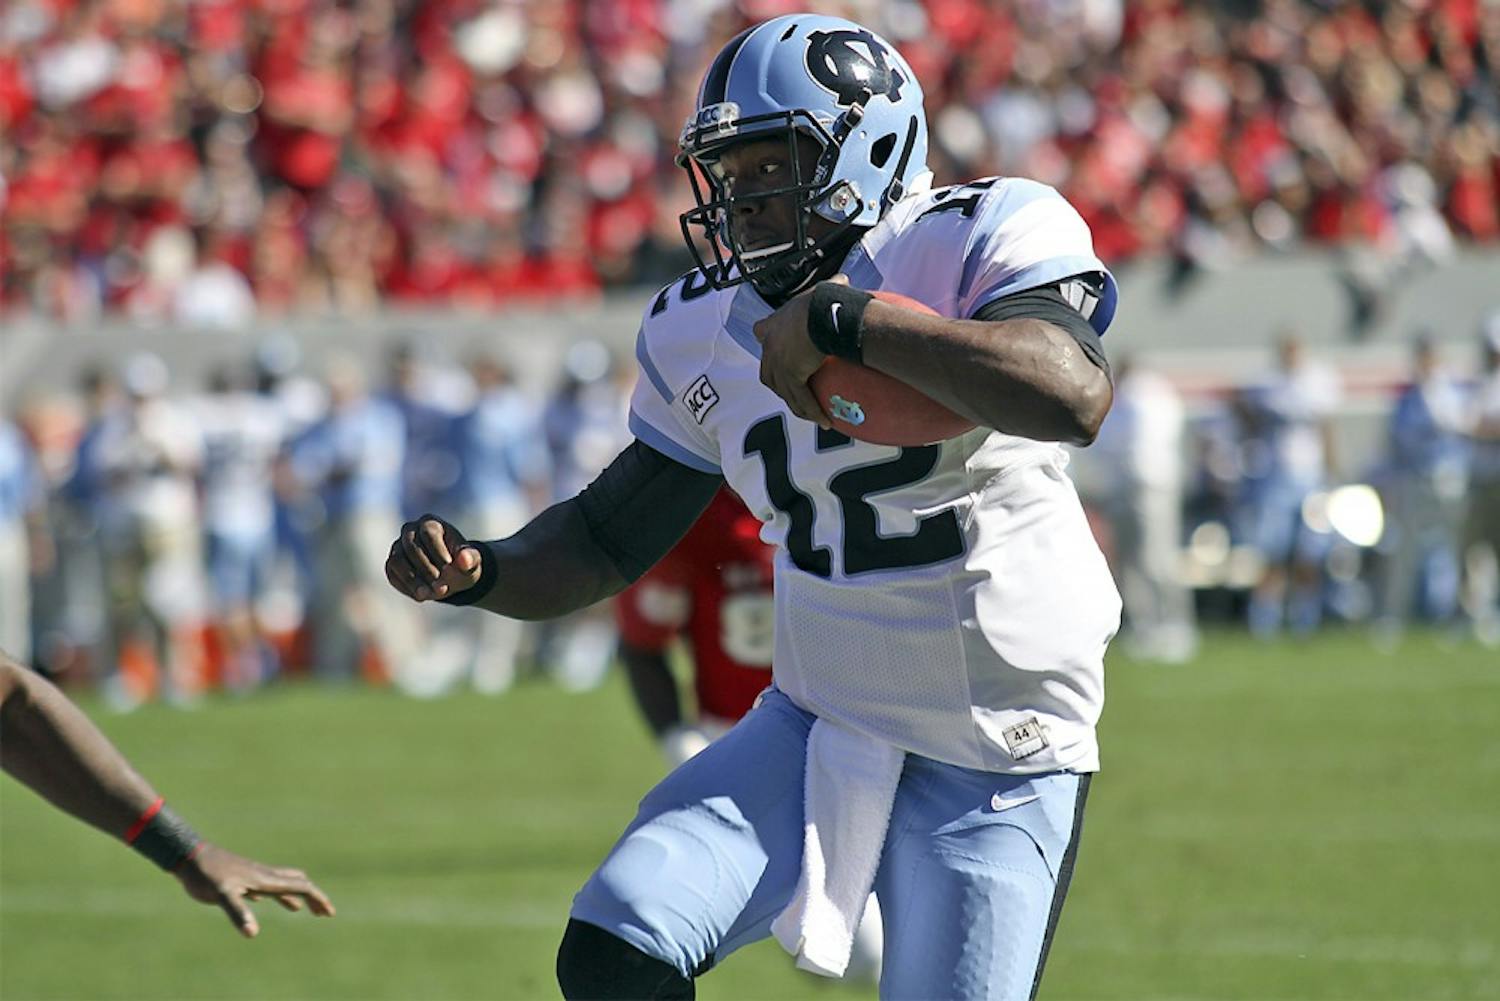 UNC defeated NC State 27-19 at Carter-Finley Stadium in Raleigh, N.C. on Nov. 2. 